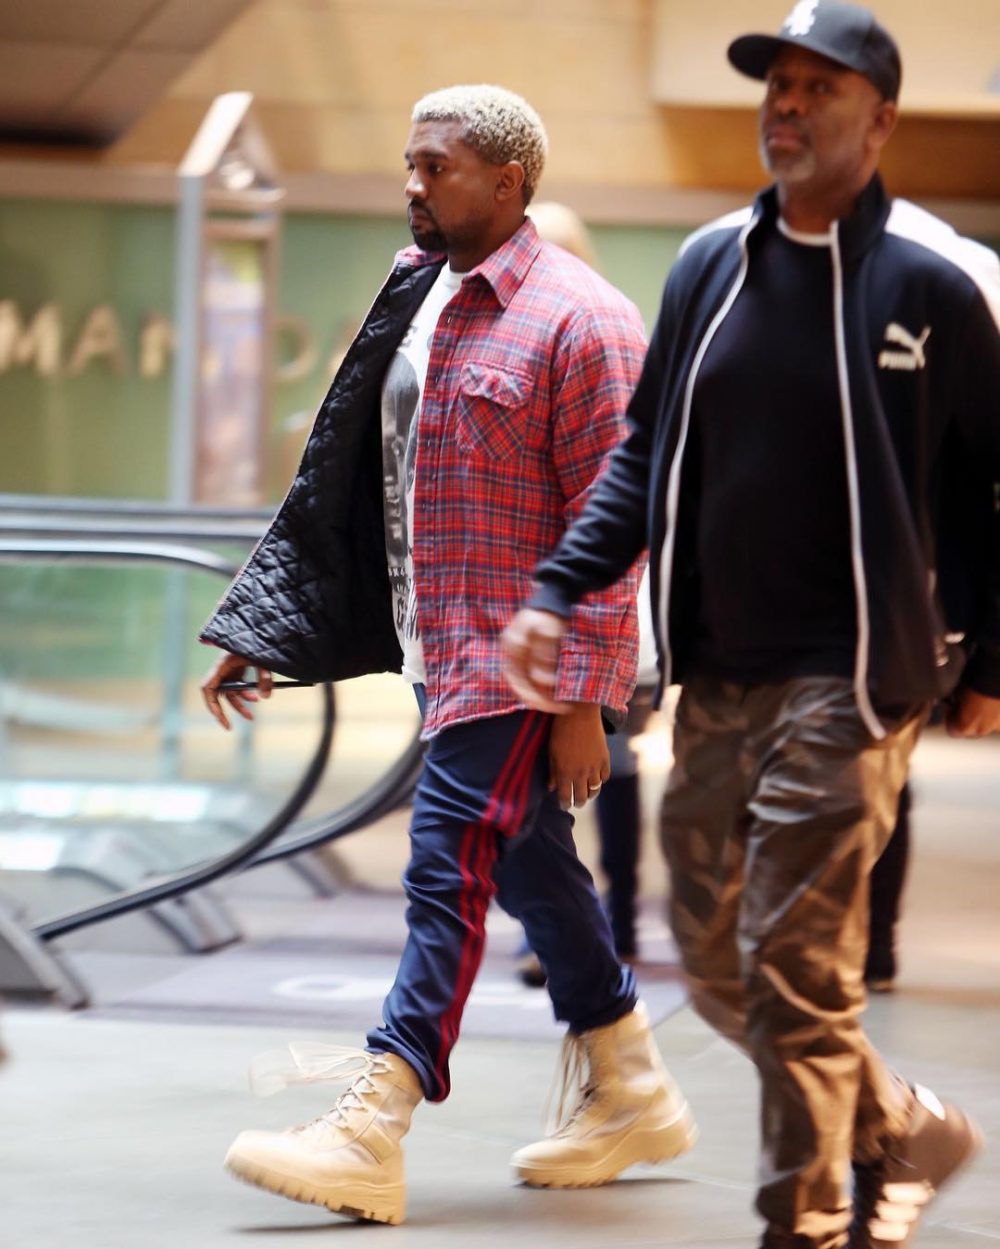 SPOTTED: Kanye West In Adidas Yeezy Season Calabasas Sweatpants and Boots